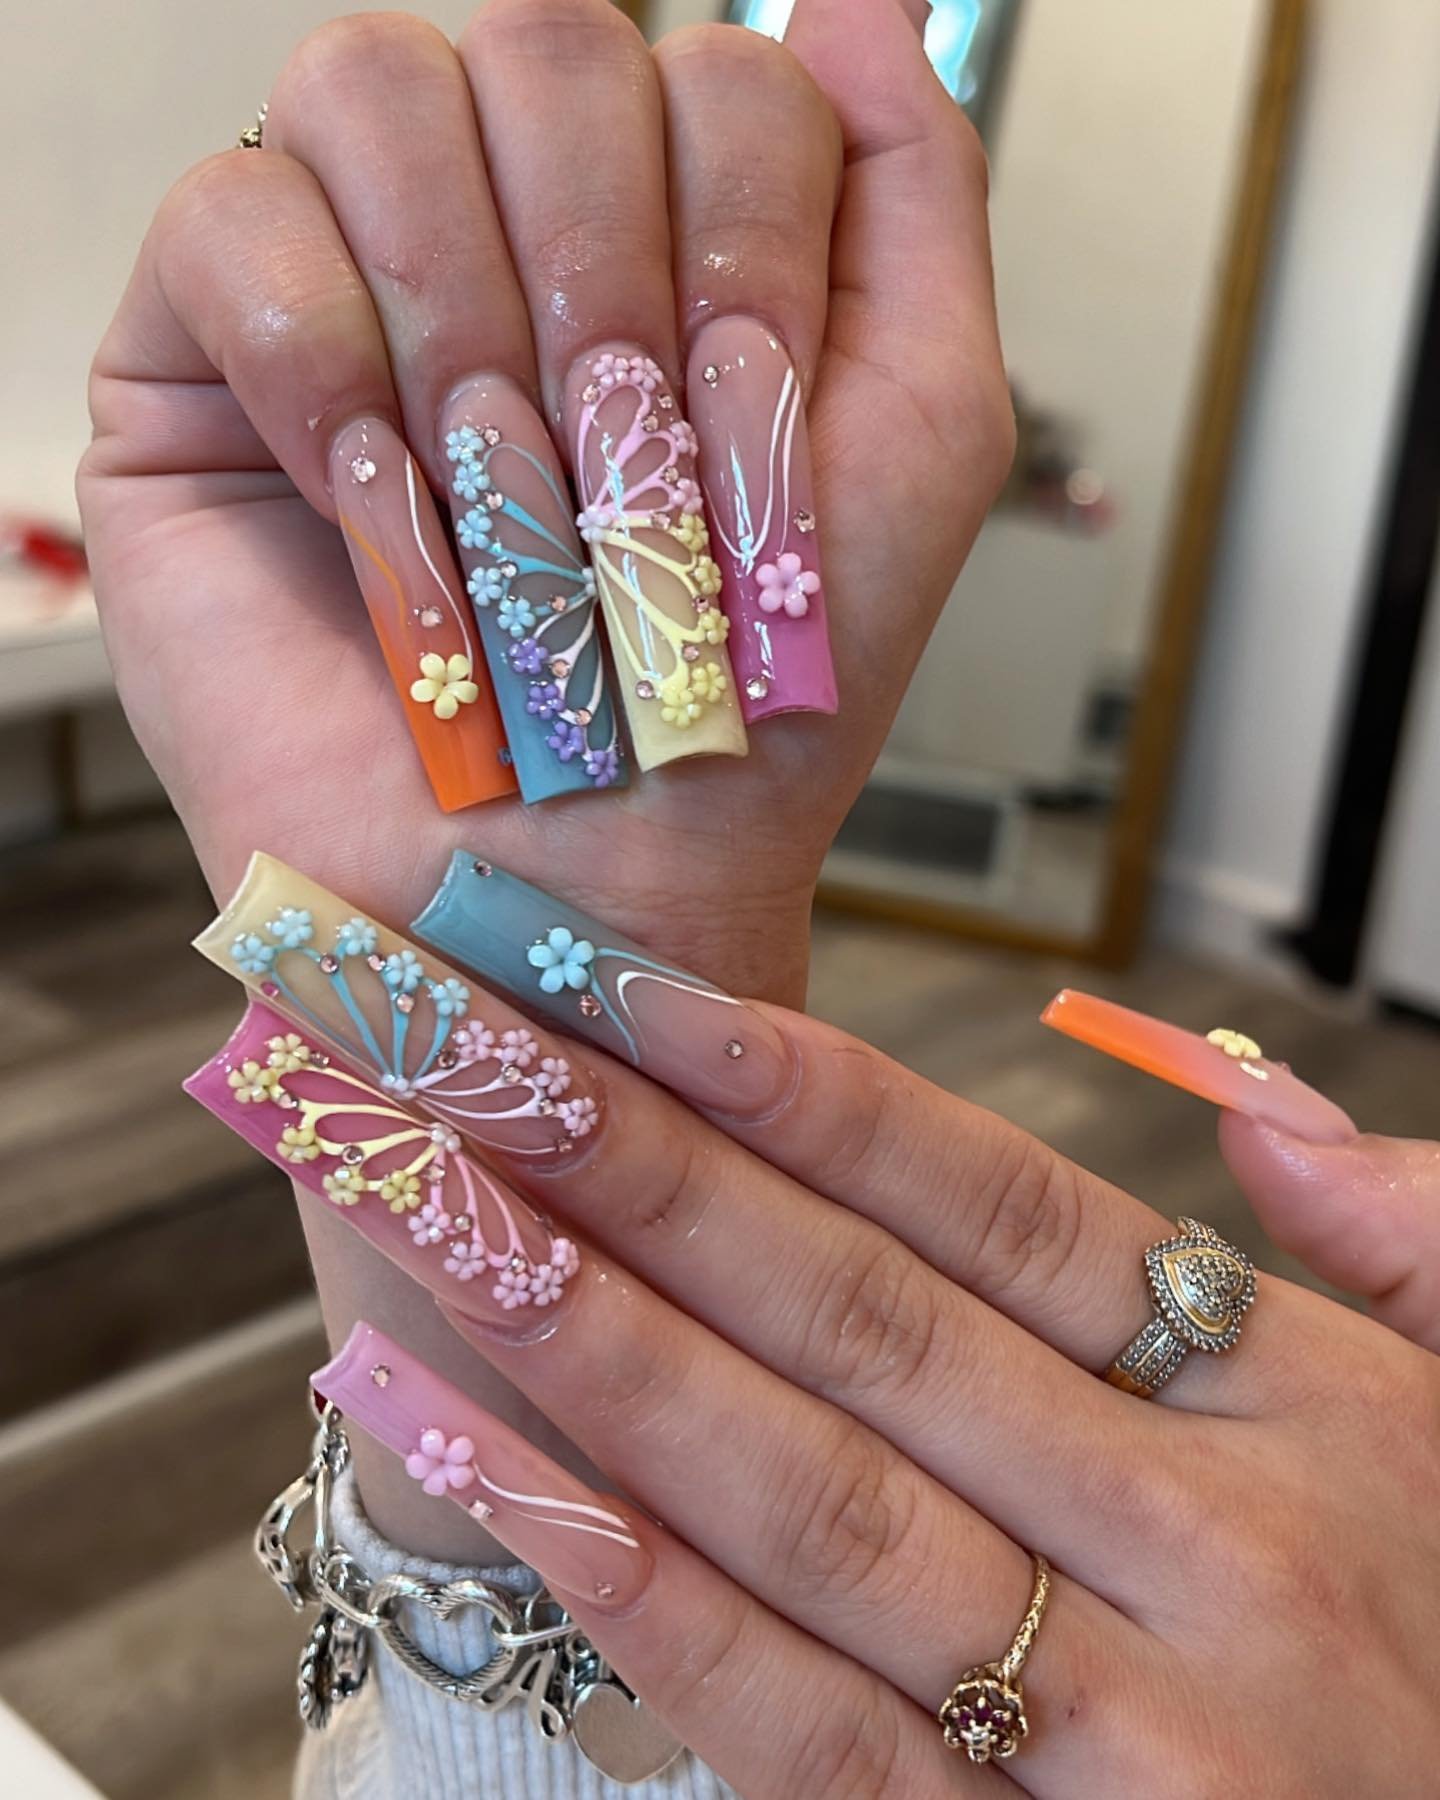 4 - Picture of Butterfly Nails